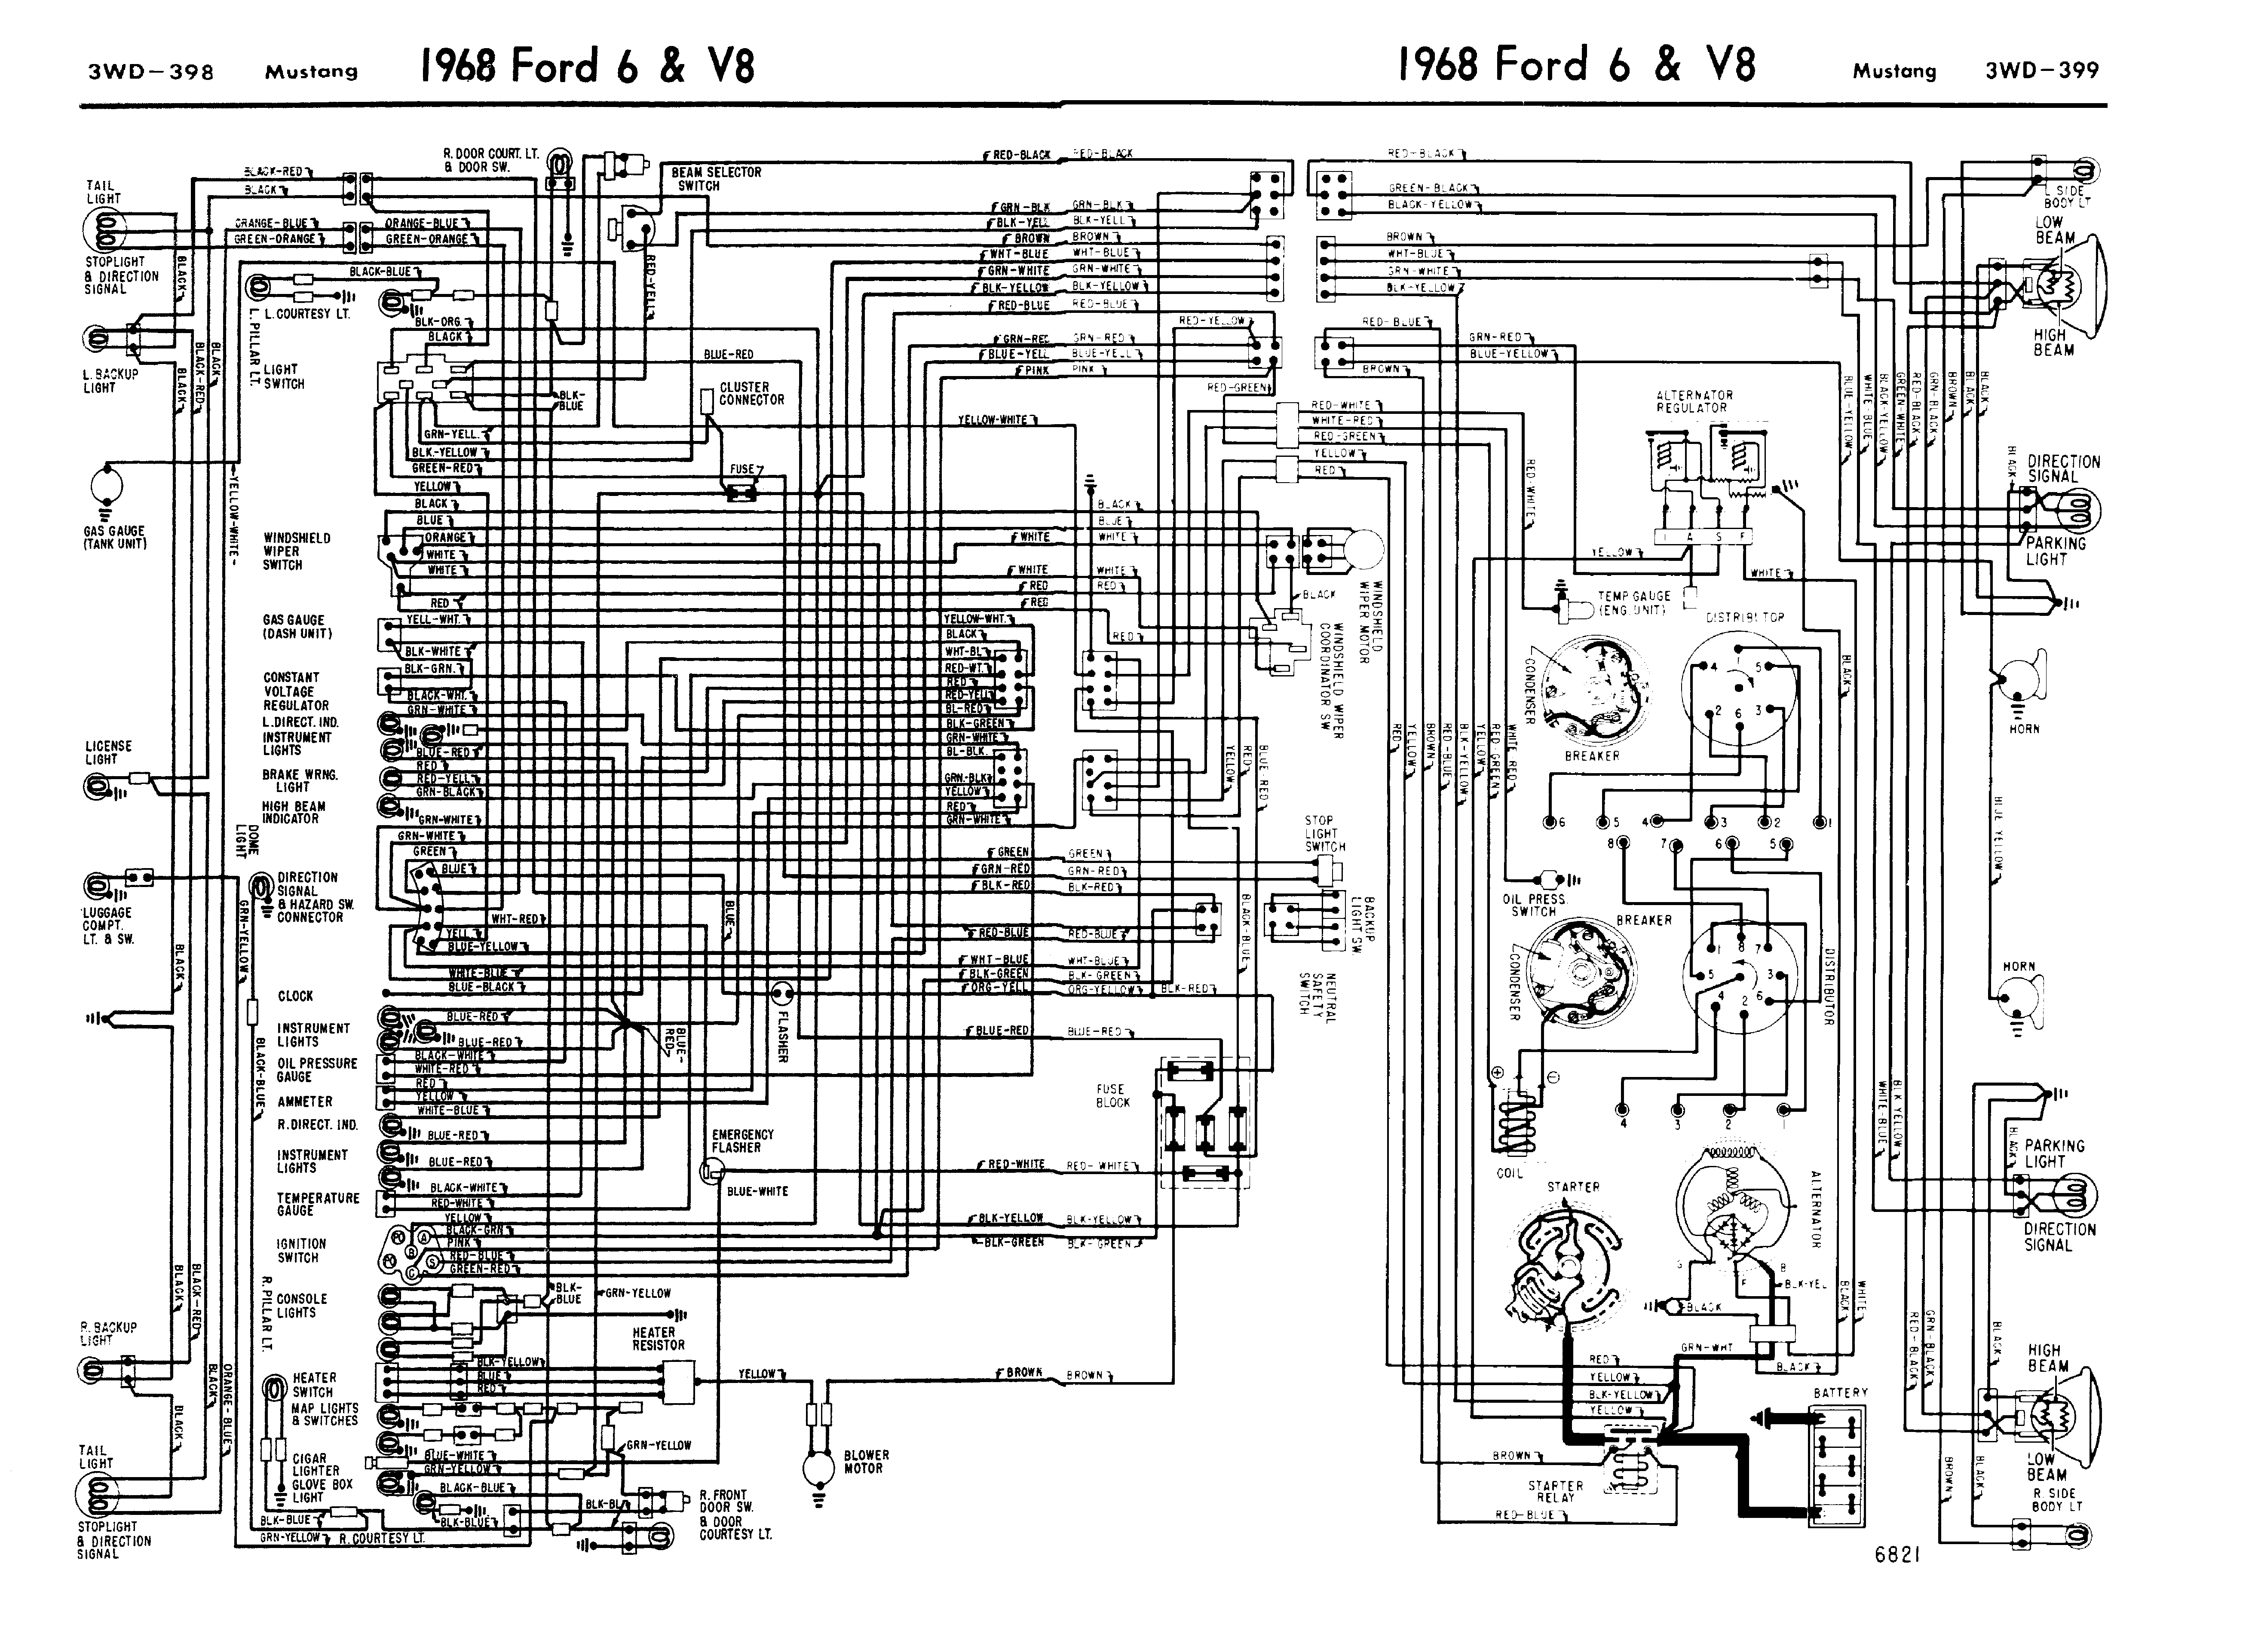 wiring diagram for gc5haxsy03